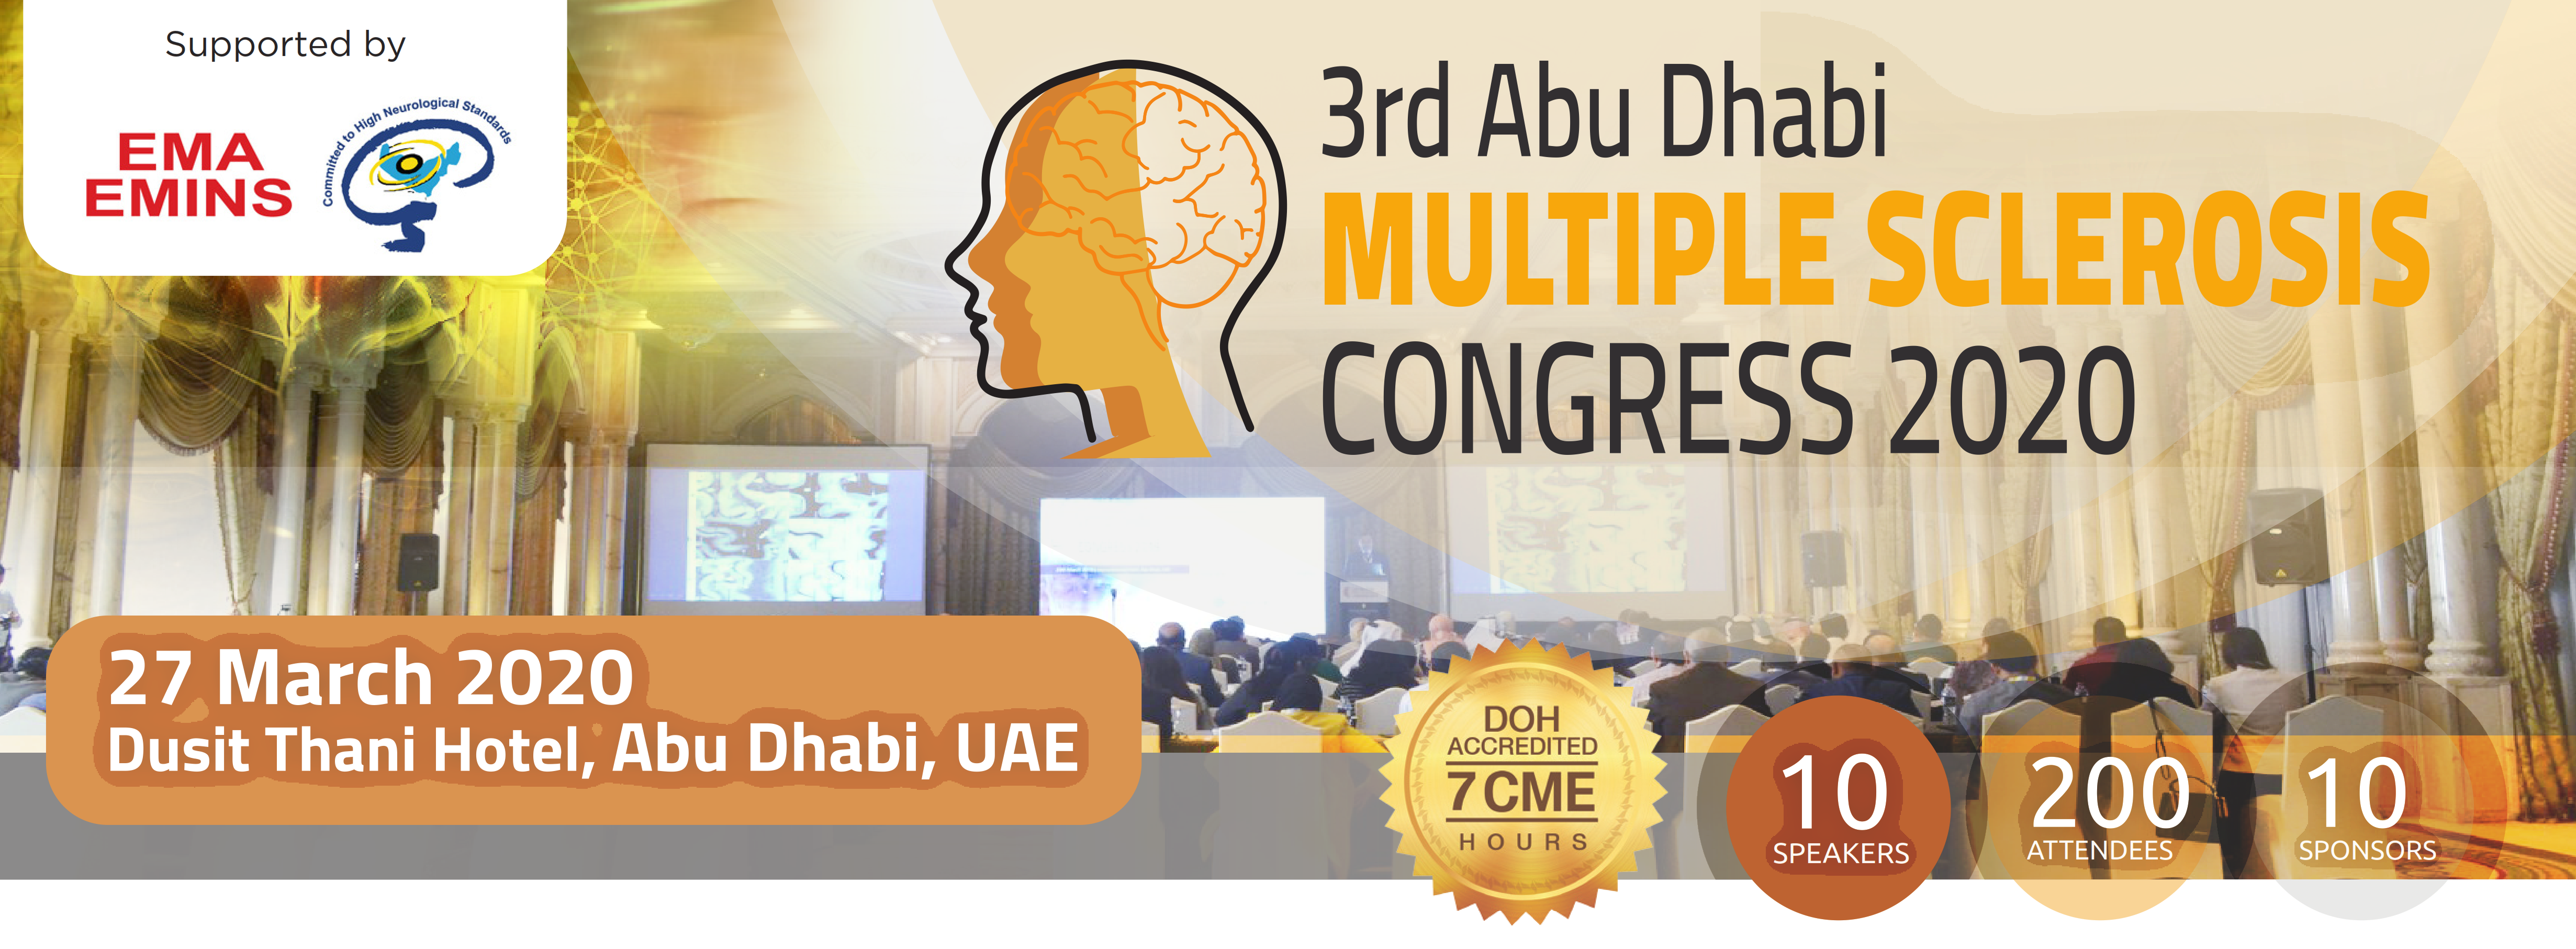 multiple sclerosis congress 2020